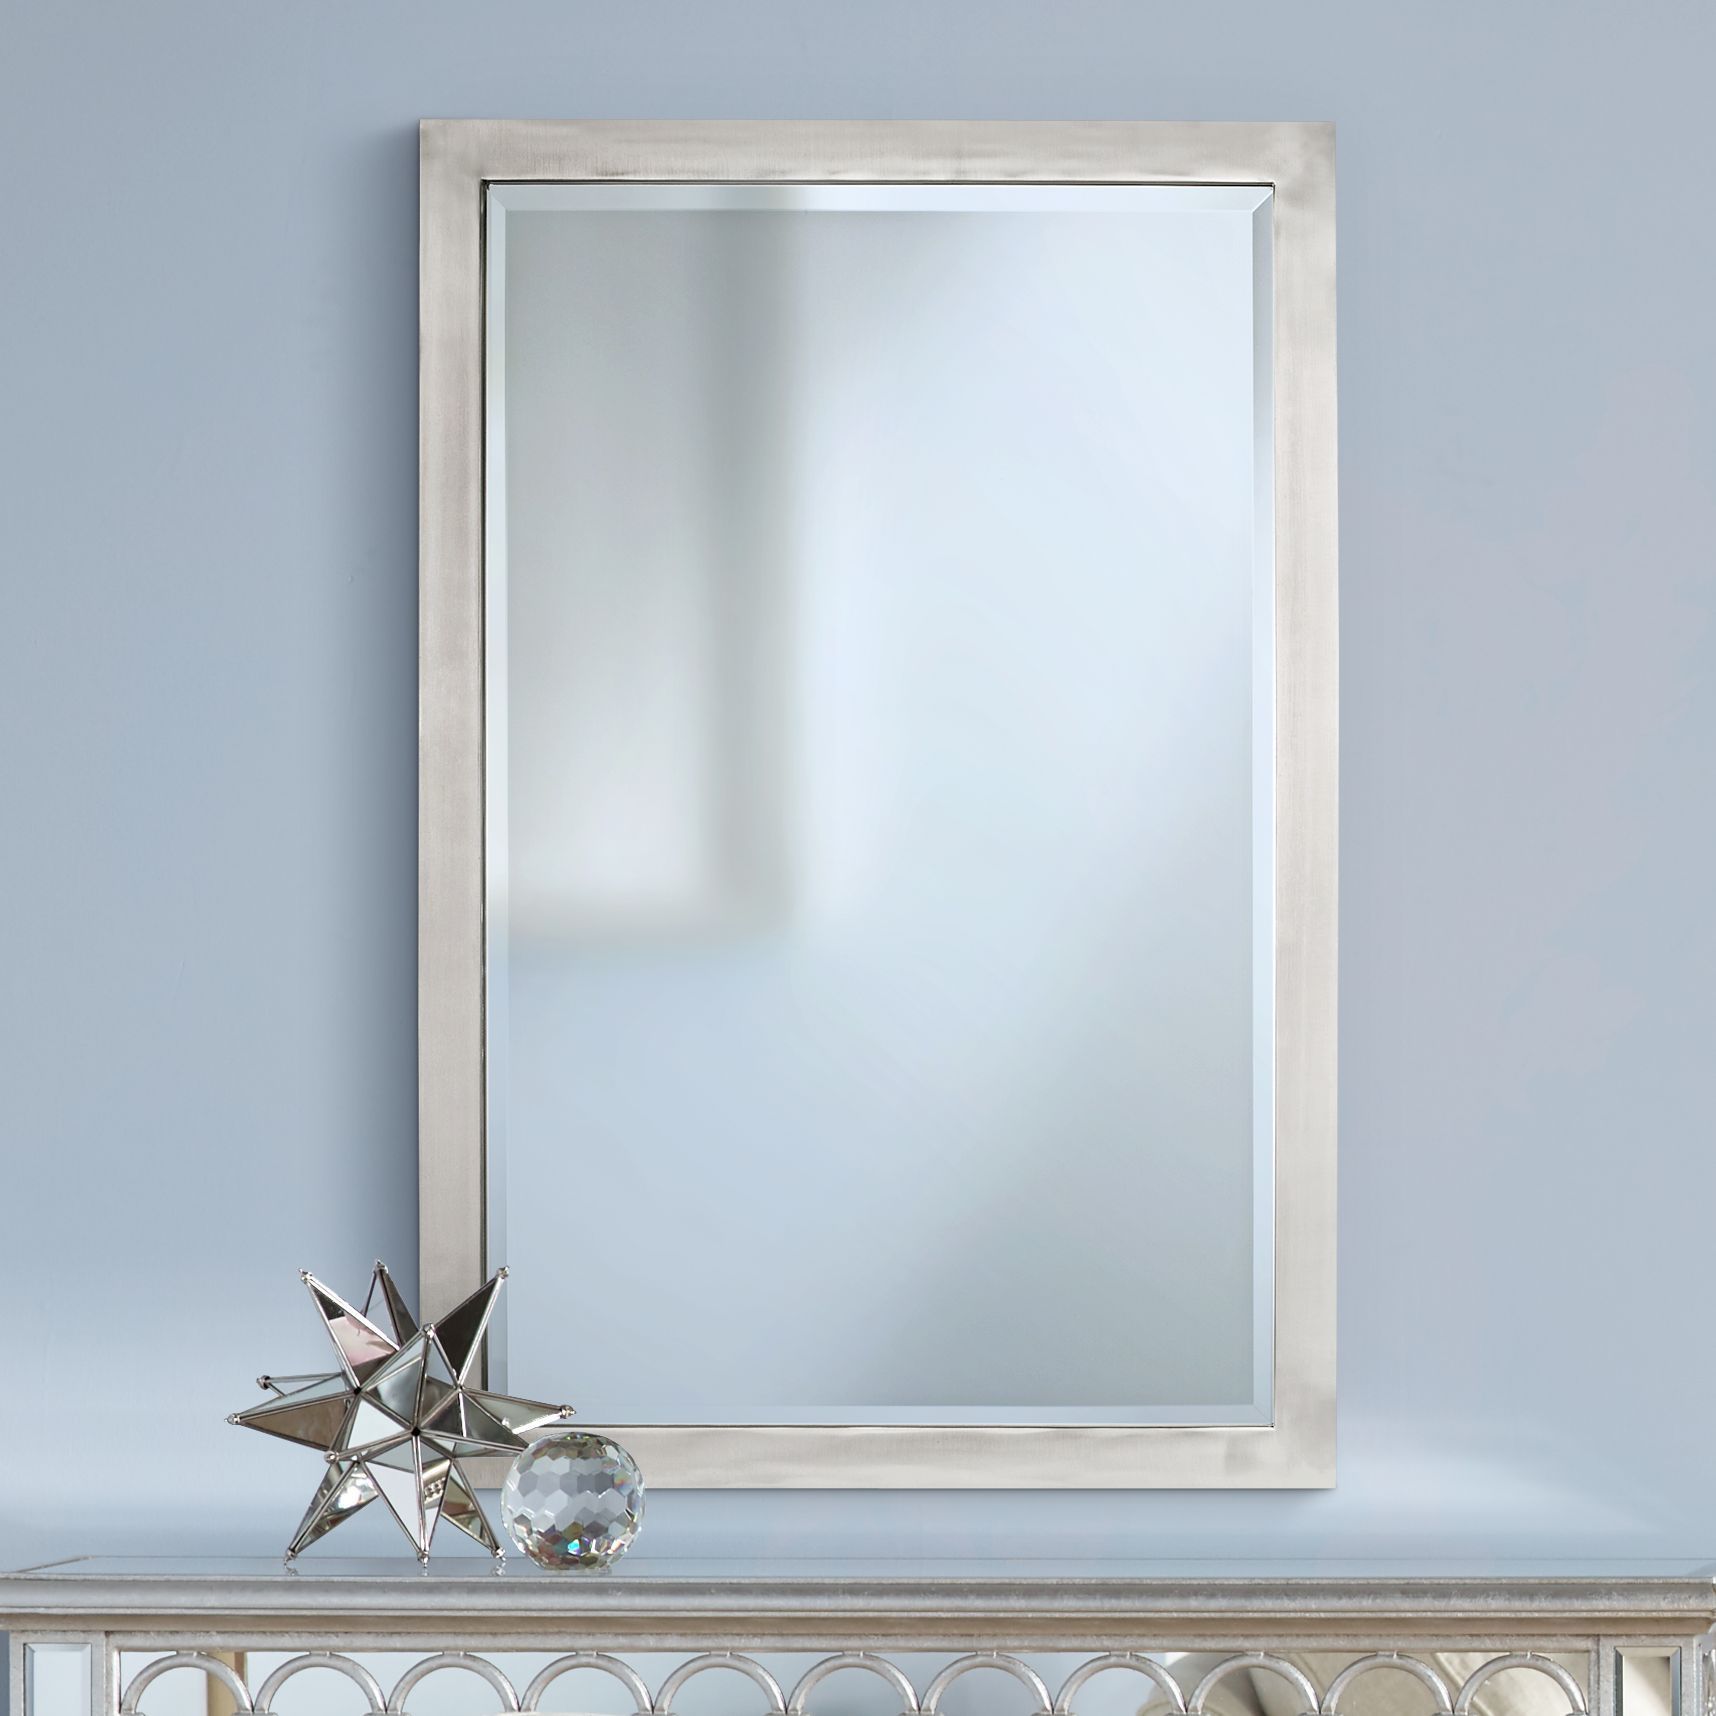 Metzeo 33" X 22" Brushed Nickel Wall Mirror – #T4543 | Lamps Plus In Pertaining To Oxidized Nickel Wall Mirrors (View 7 of 15)